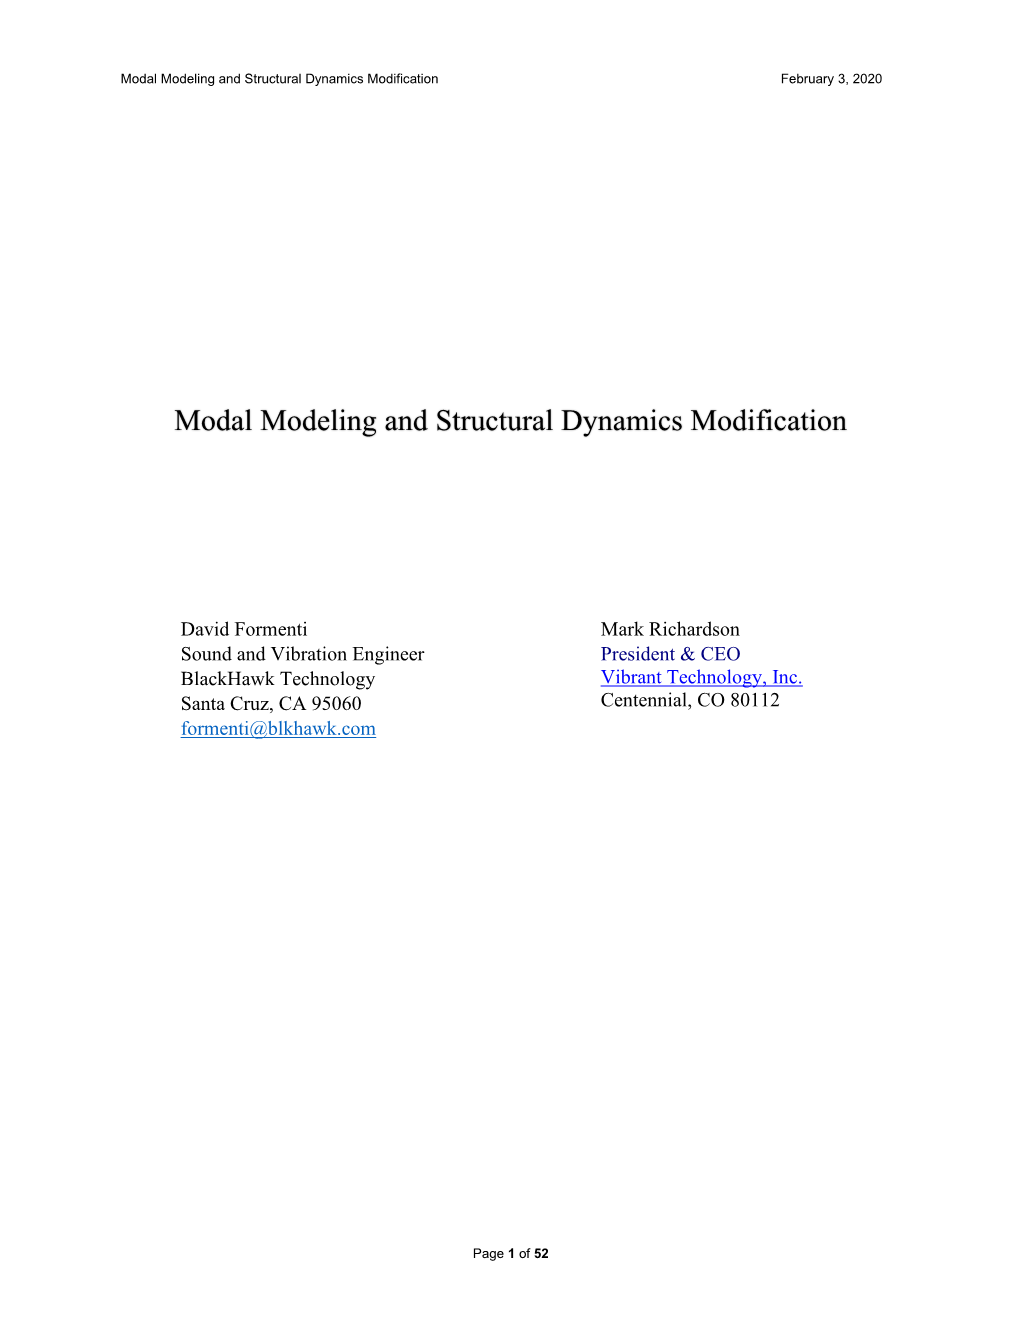 Structural Dynamics Modification and Modal Modeling